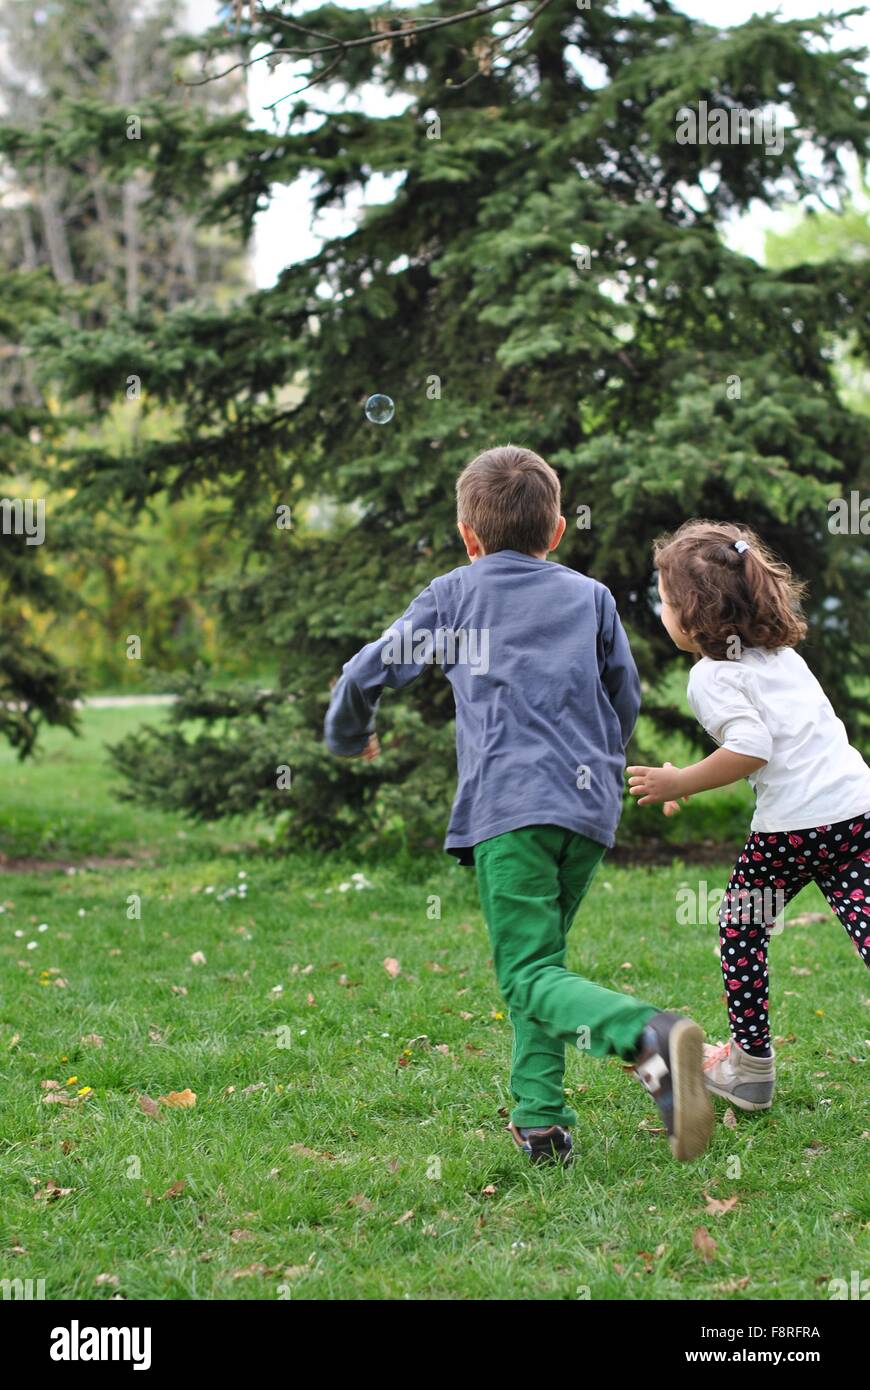 Boy and girl chasing soap bubbles Stock Photo